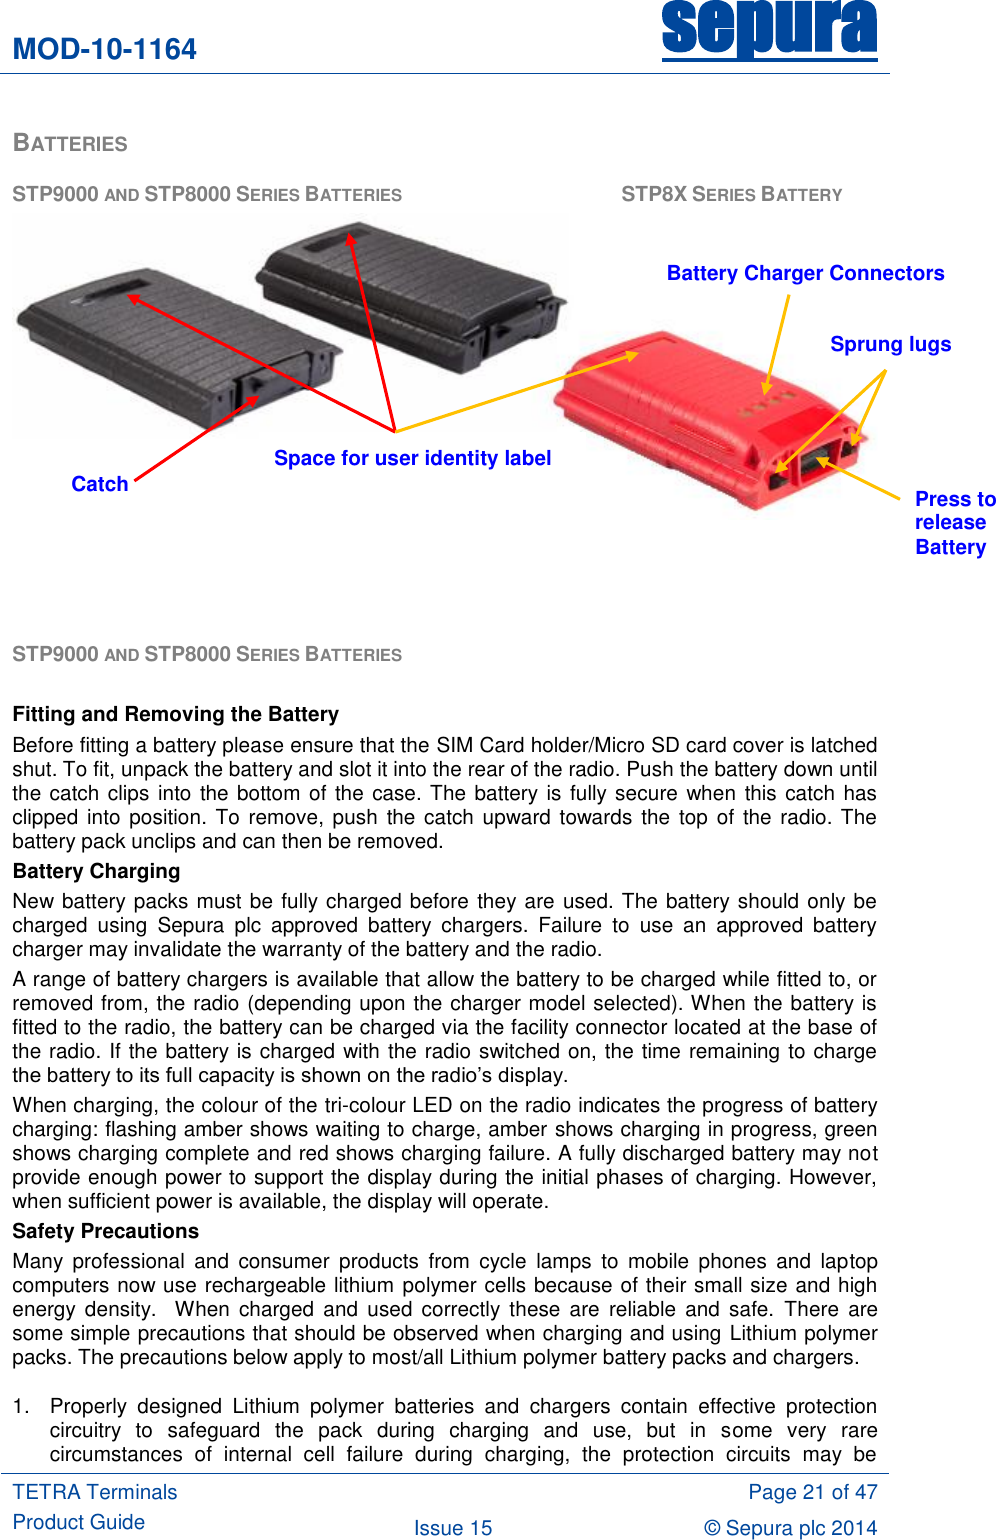 MOD-10-1164 sepura  TETRA Terminals Product Guide  Page 21 of 47 Issue 15 © Sepura plc 2014   BATTERIES STP9000 AND STP8000 SERIES BATTERIES        STP8X SERIES BATTERY    STP9000 AND STP8000 SERIES BATTERIES   Fitting and Removing the Battery Before fitting a battery please ensure that the SIM Card holder/Micro SD card cover is latched shut. To fit, unpack the battery and slot it into the rear of the radio. Push the battery down until the catch clips into the bottom of the case. The battery is fully  secure when  this catch has clipped  into position. To remove, push  the catch upward  towards  the top of the  radio. The battery pack unclips and can then be removed. Battery Charging New battery packs must be fully charged before they are used. The battery should only be charged  using  Sepura  plc  approved  battery  chargers.  Failure  to  use  an  approved  battery charger may invalidate the warranty of the battery and the radio. A range of battery chargers is available that allow the battery to be charged while fitted to, or removed from, the radio (depending upon the charger model selected). When the battery is fitted to the radio, the battery can be charged via the facility connector located at the base of the radio. If the battery is charged with the radio switched on, the time remaining to charge the battery to its full capacity is shown on the radio‟s display. When charging, the colour of the tri-colour LED on the radio indicates the progress of battery charging: flashing amber shows waiting to charge, amber shows charging in progress, green shows charging complete and red shows charging failure. A fully discharged battery may not provide enough power to support the display during the initial phases of charging. However, when sufficient power is available, the display will operate. Safety Precautions Many  professional  and  consumer  products  from  cycle  lamps  to  mobile  phones  and  laptop computers now use rechargeable lithium polymer cells because of their small size and high energy  density.   When  charged  and  used  correctly  these  are  reliable  and  safe.  There  are some simple precautions that should be observed when charging and using Lithium polymer packs. The precautions below apply to most/all Lithium polymer battery packs and chargers. 1.  Properly  designed  Lithium  polymer  batteries  and  chargers  contain  effective  protection circuitry  to  safeguard  the  pack  during  charging  and  use,  but  in  some  very  rare circumstances  of  internal  cell  failure  during  charging,  the  protection  circuits  may  be Space for user identity label Battery Charger Connectors Press to release Battery   Sprung lugs Catch 